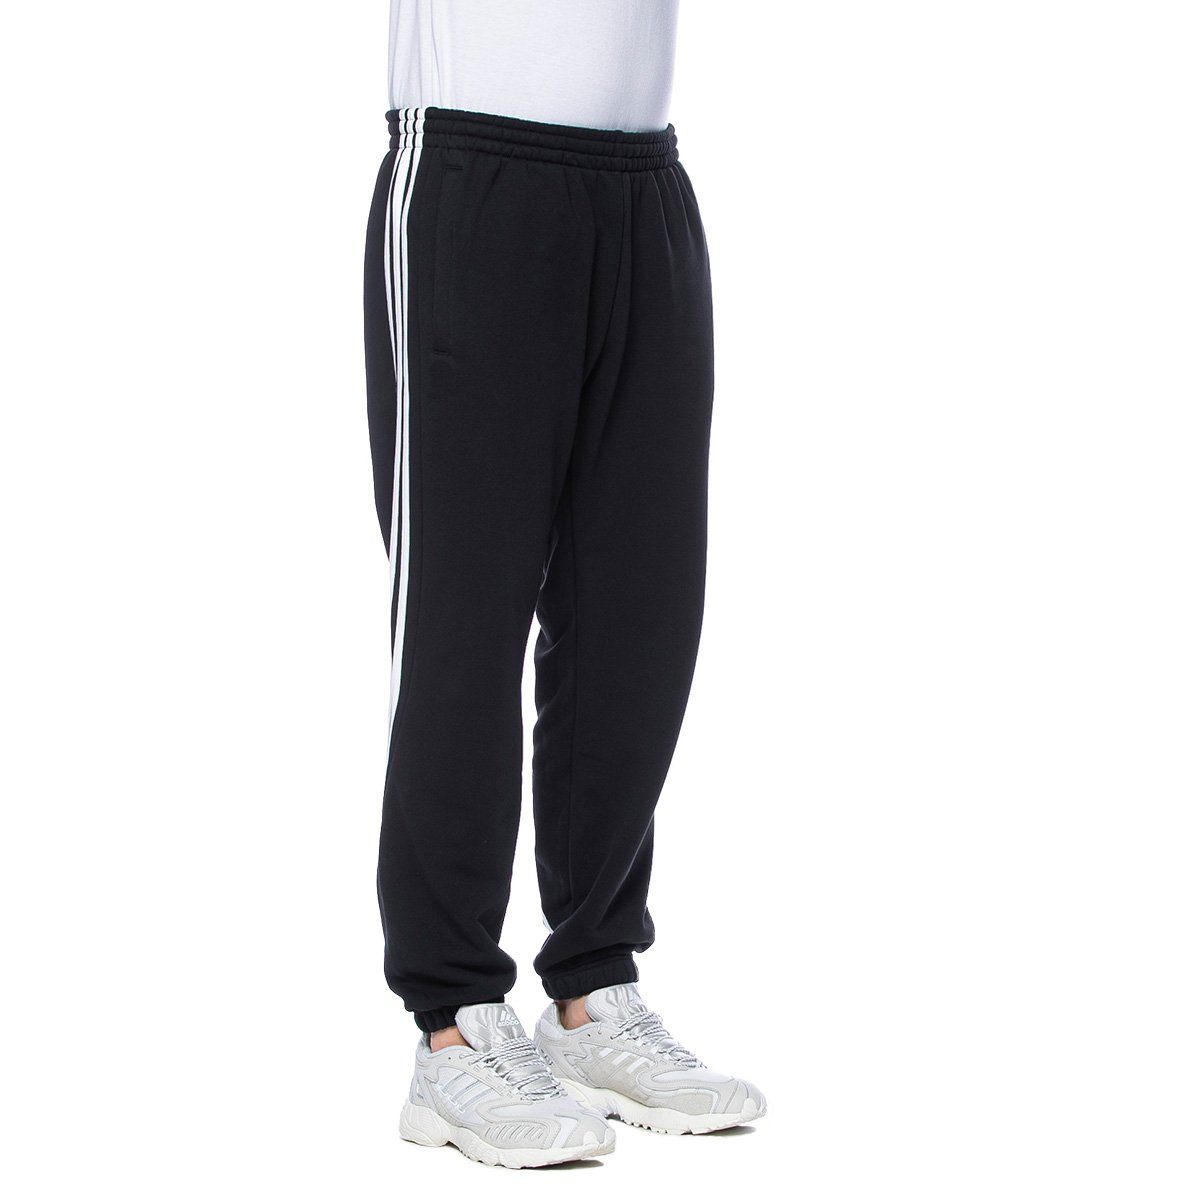 adidas originals joggers with wrap 3 stripes in grey